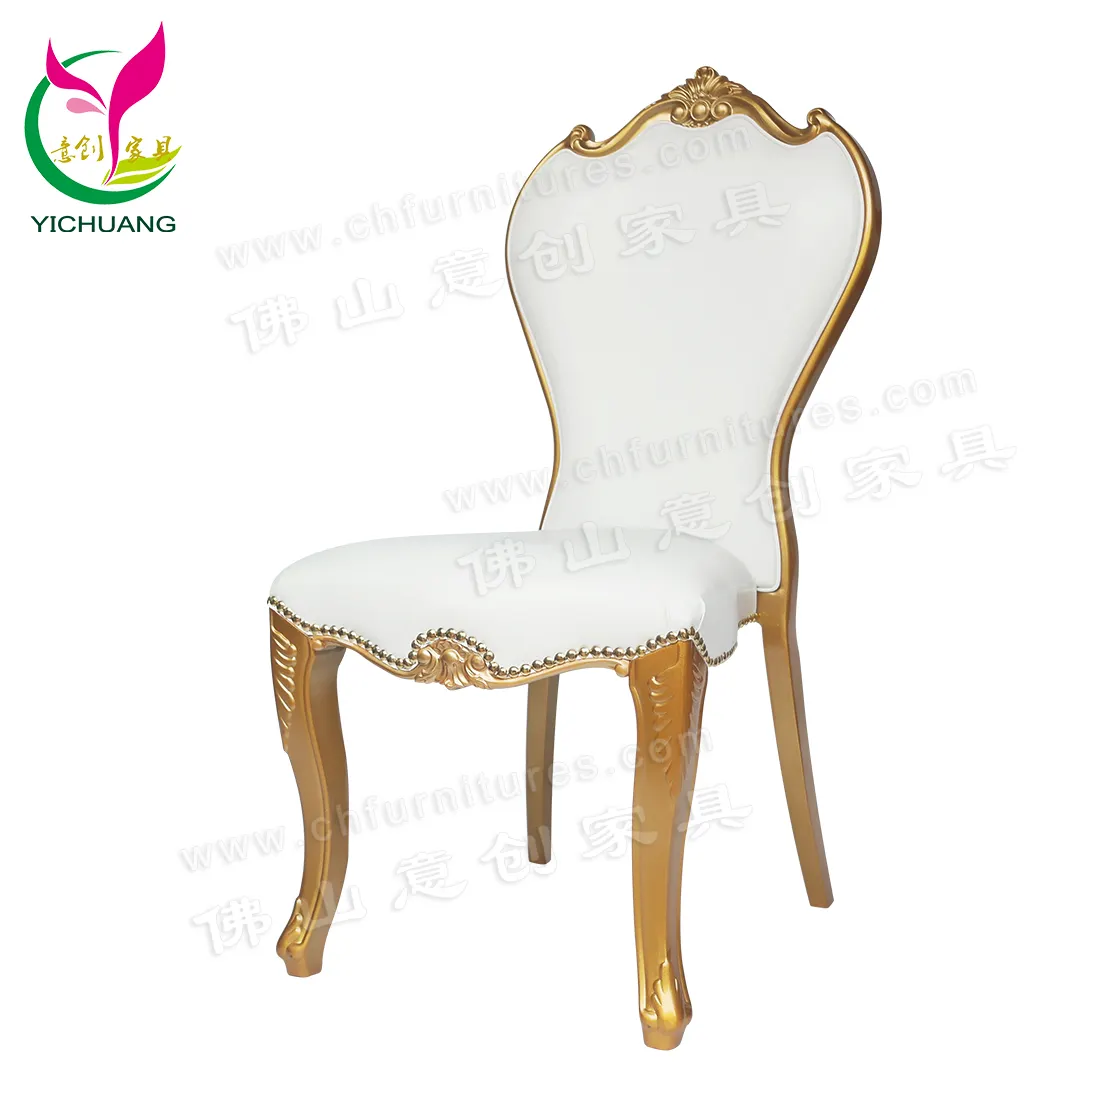 YC-D12-01 Rental White Royal luxury Throne King Chairs Wedding for Party and Event